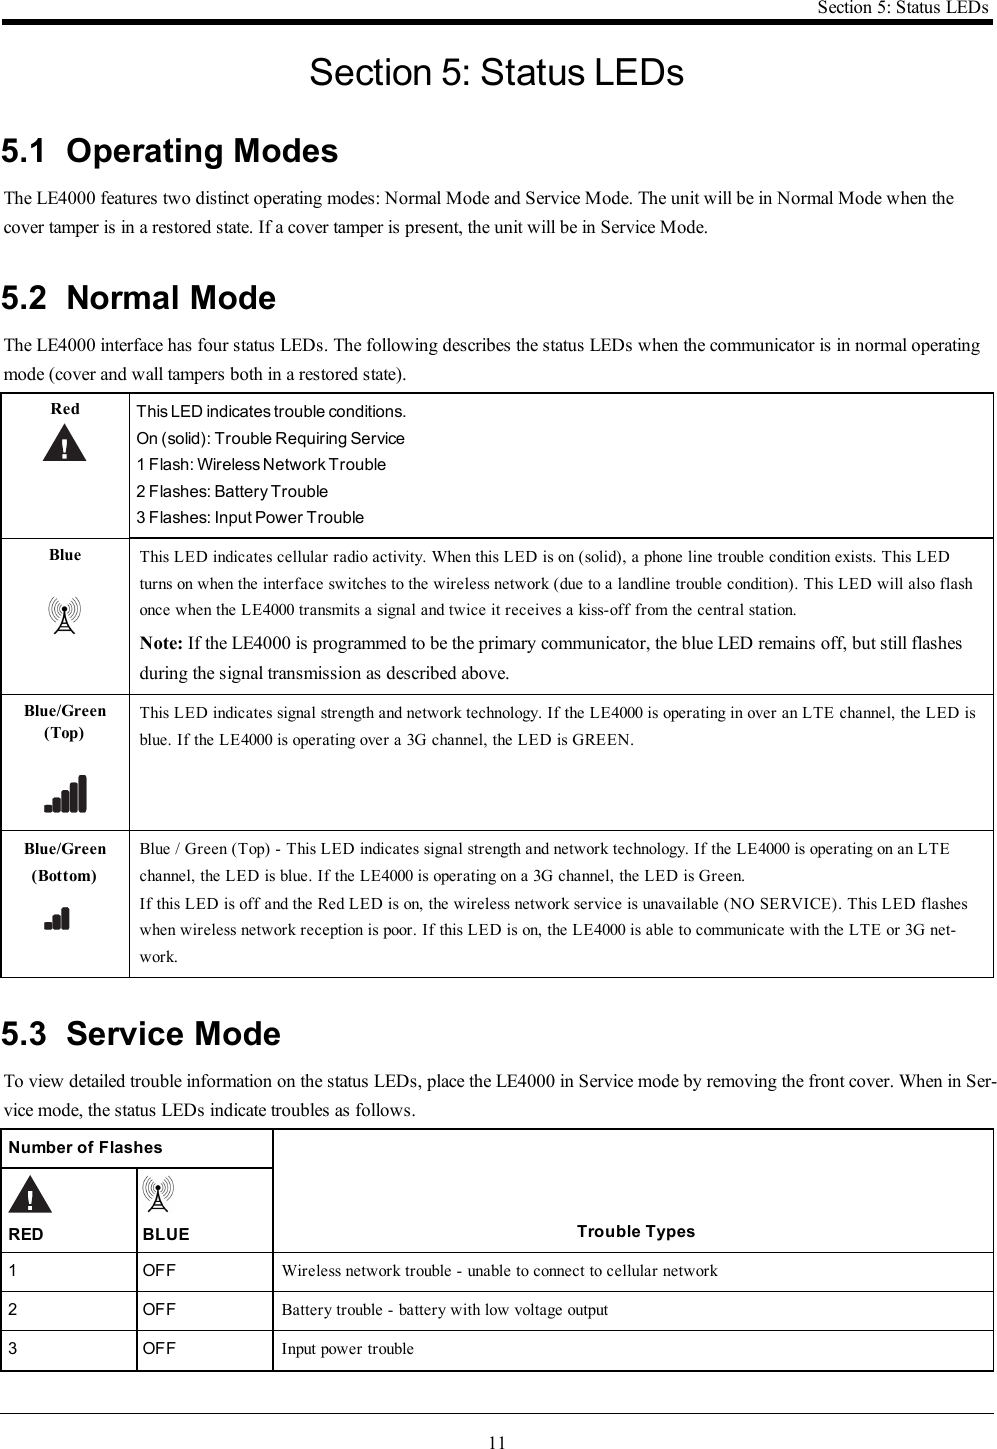 11Section 5: Status LEDsSection 5: Status LEDs5.1 Operating ModesThe LE4000 features two distinct operating modes: Normal Mode and Service Mode. The unit will be in Normal Mode when thecover tamper is in a restored state. If a cover tamper is present, the unit will be in Service Mode.5.2 Normal ModeThe LE4000 interface has four status LEDs. The following describes the status LEDs when the communicator is in normal operatingmode (cover and wall tampers both in a restored state).Red This LED indicates trouble conditions.On (solid): Trouble Requiring Service1 Flash: Wireless Network Trouble2 Flashes: Battery Trouble3 Flashes: Input Power TroubleBlue This LED indicates cellular radio activity. When this LED is on (solid), a phone line trouble condition exists. This LEDturns on when the interface switches to the wireless network (due to a landline trouble condition). This LED will also flashonce when the LE4000 transmits a signal and twice it receives a kiss-off from the central station.Note: If the LE4000 is programmed to be the primary communicator, the blue LED remains off, but still flashesduring the signal transmission as described above.Blue/Green(Top)This LED indicates signal strength and network technology. If the LE4000 is operating in over an LTE channel, the LED isblue. If the LE4000 is operating over a 3G channel, the LED is GREEN.Blue/Green(Bottom)Blue / Green (Top) - This LED indicates signal strength and network technology. If the LE4000 is operating on an LTEchannel, the LED is blue. If the LE4000 is operating on a 3G channel, the LED is Green.If this LED is off and the Red LED is on, the wireless network service is unavailable (NO SERVICE). This LED flasheswhen wireless network reception is poor. If this LED is on, the LE4000 is able to communicate with the LTE or 3G net-work.5.3 Service ModeTo view detailed trouble information on the status LEDs, place the LE4000 in Service mode by removing the front cover. When in Ser-vice mode, the status LEDs indicate troubles as follows.Number of FlashesTrouble TypesRED BLUE1 OFF Wireless network trouble - unable to connect to cellular network2 OFF Battery trouble - battery with low voltage output3 OFF Input power trouble